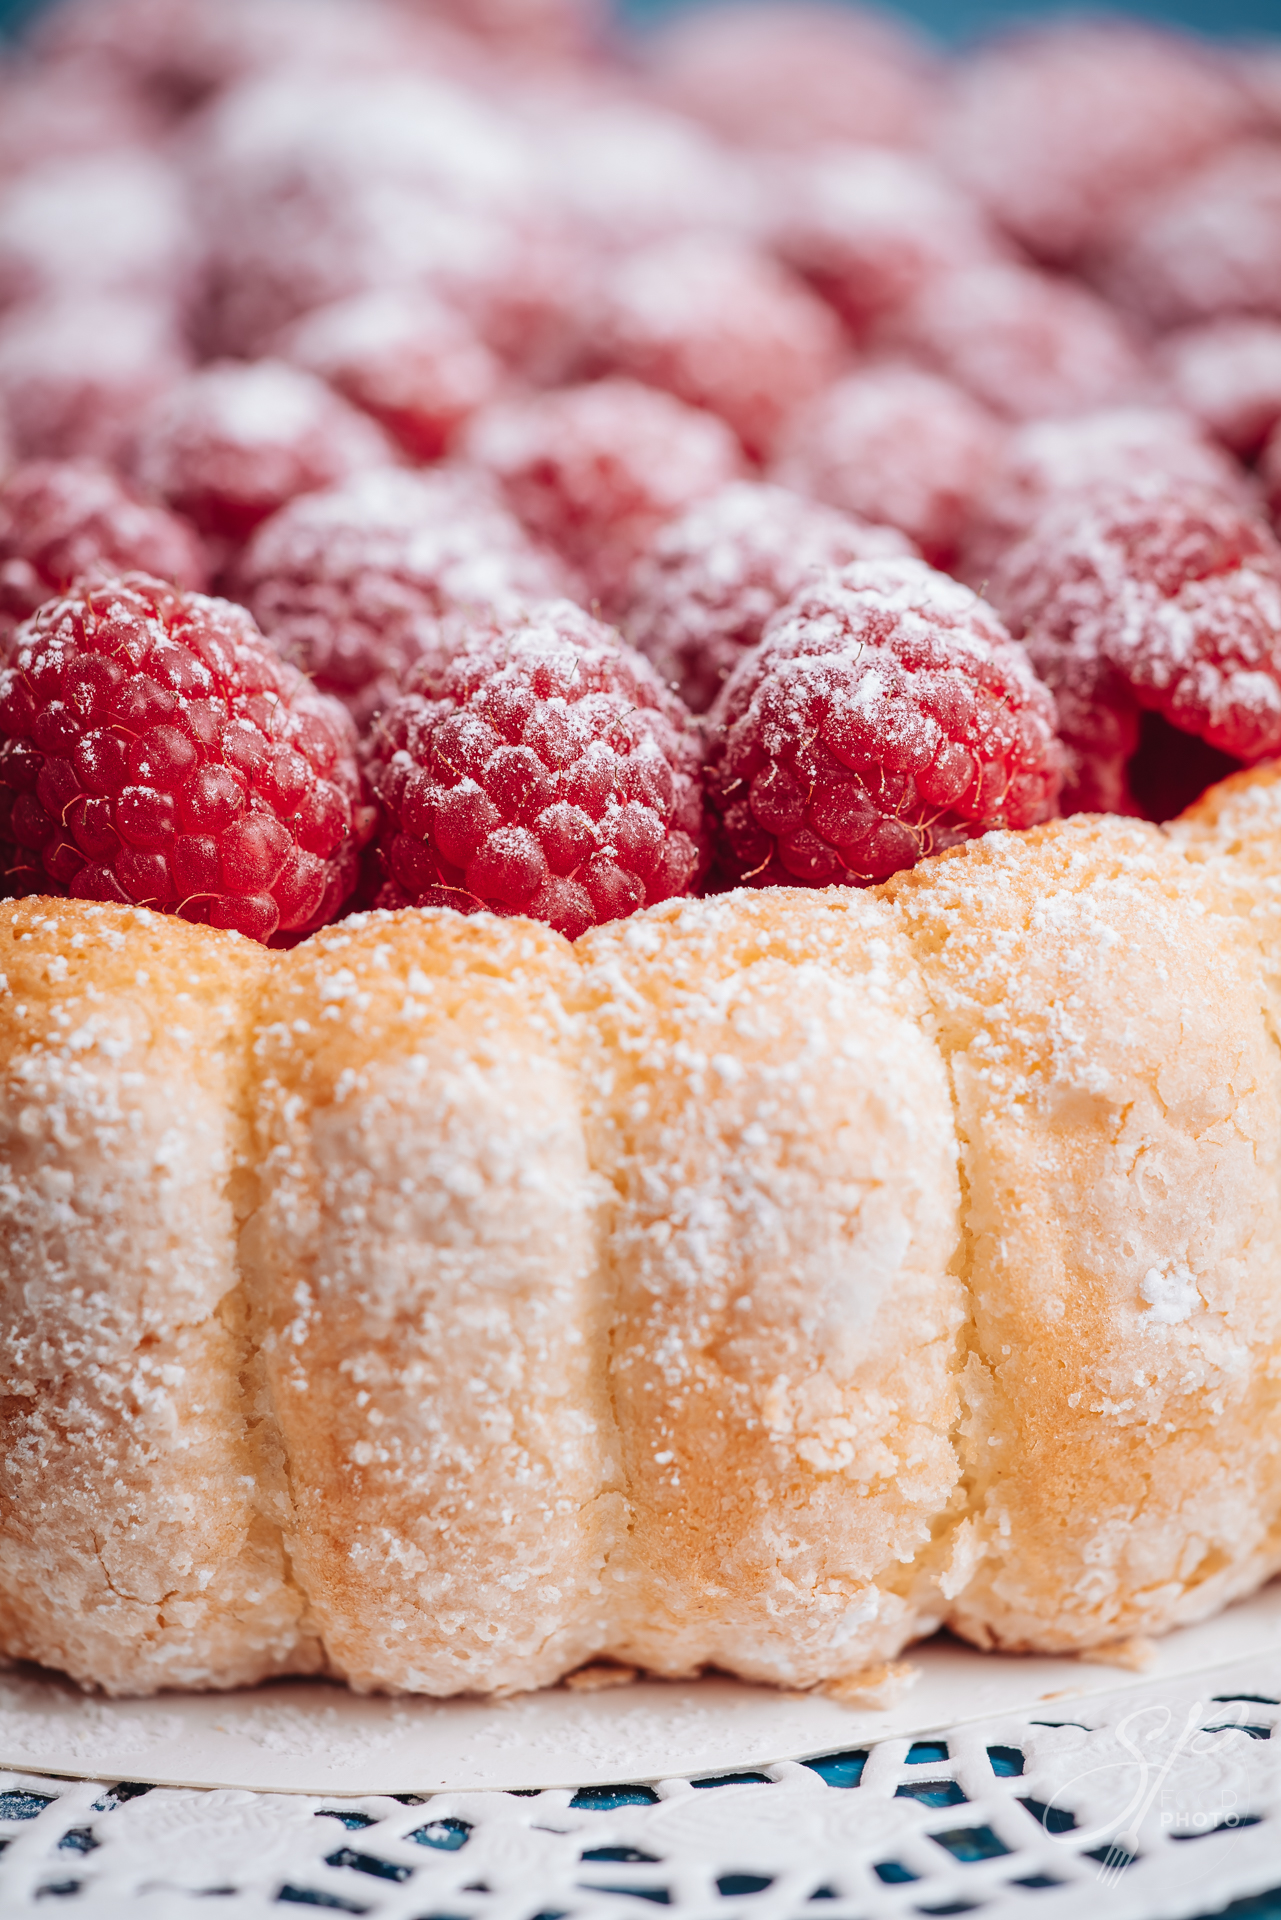 Delicious french Charlotte cake with raspberries